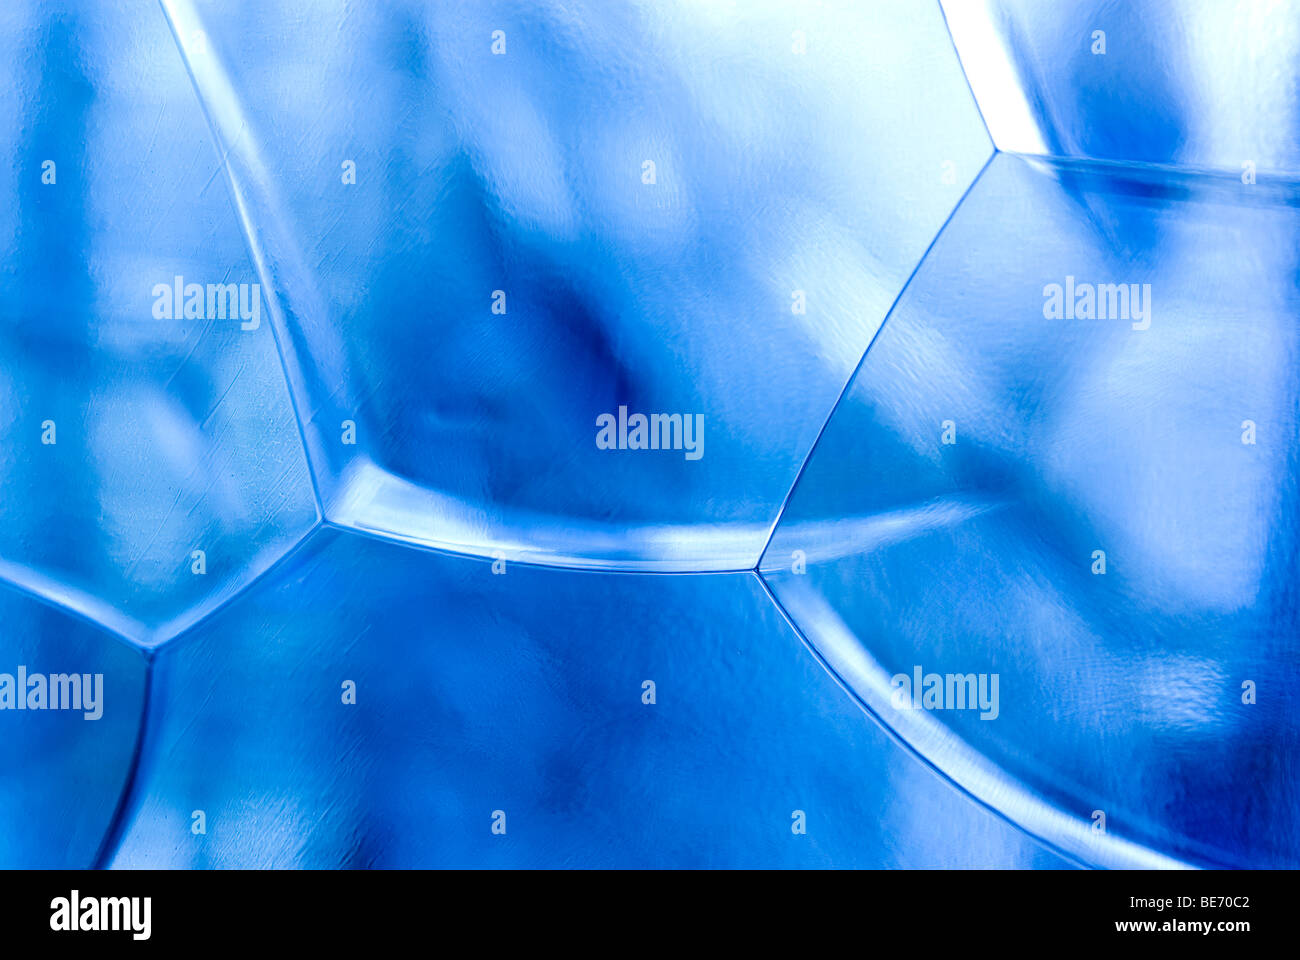 Textureof soapy bubbles structure through square glass Stock Photo